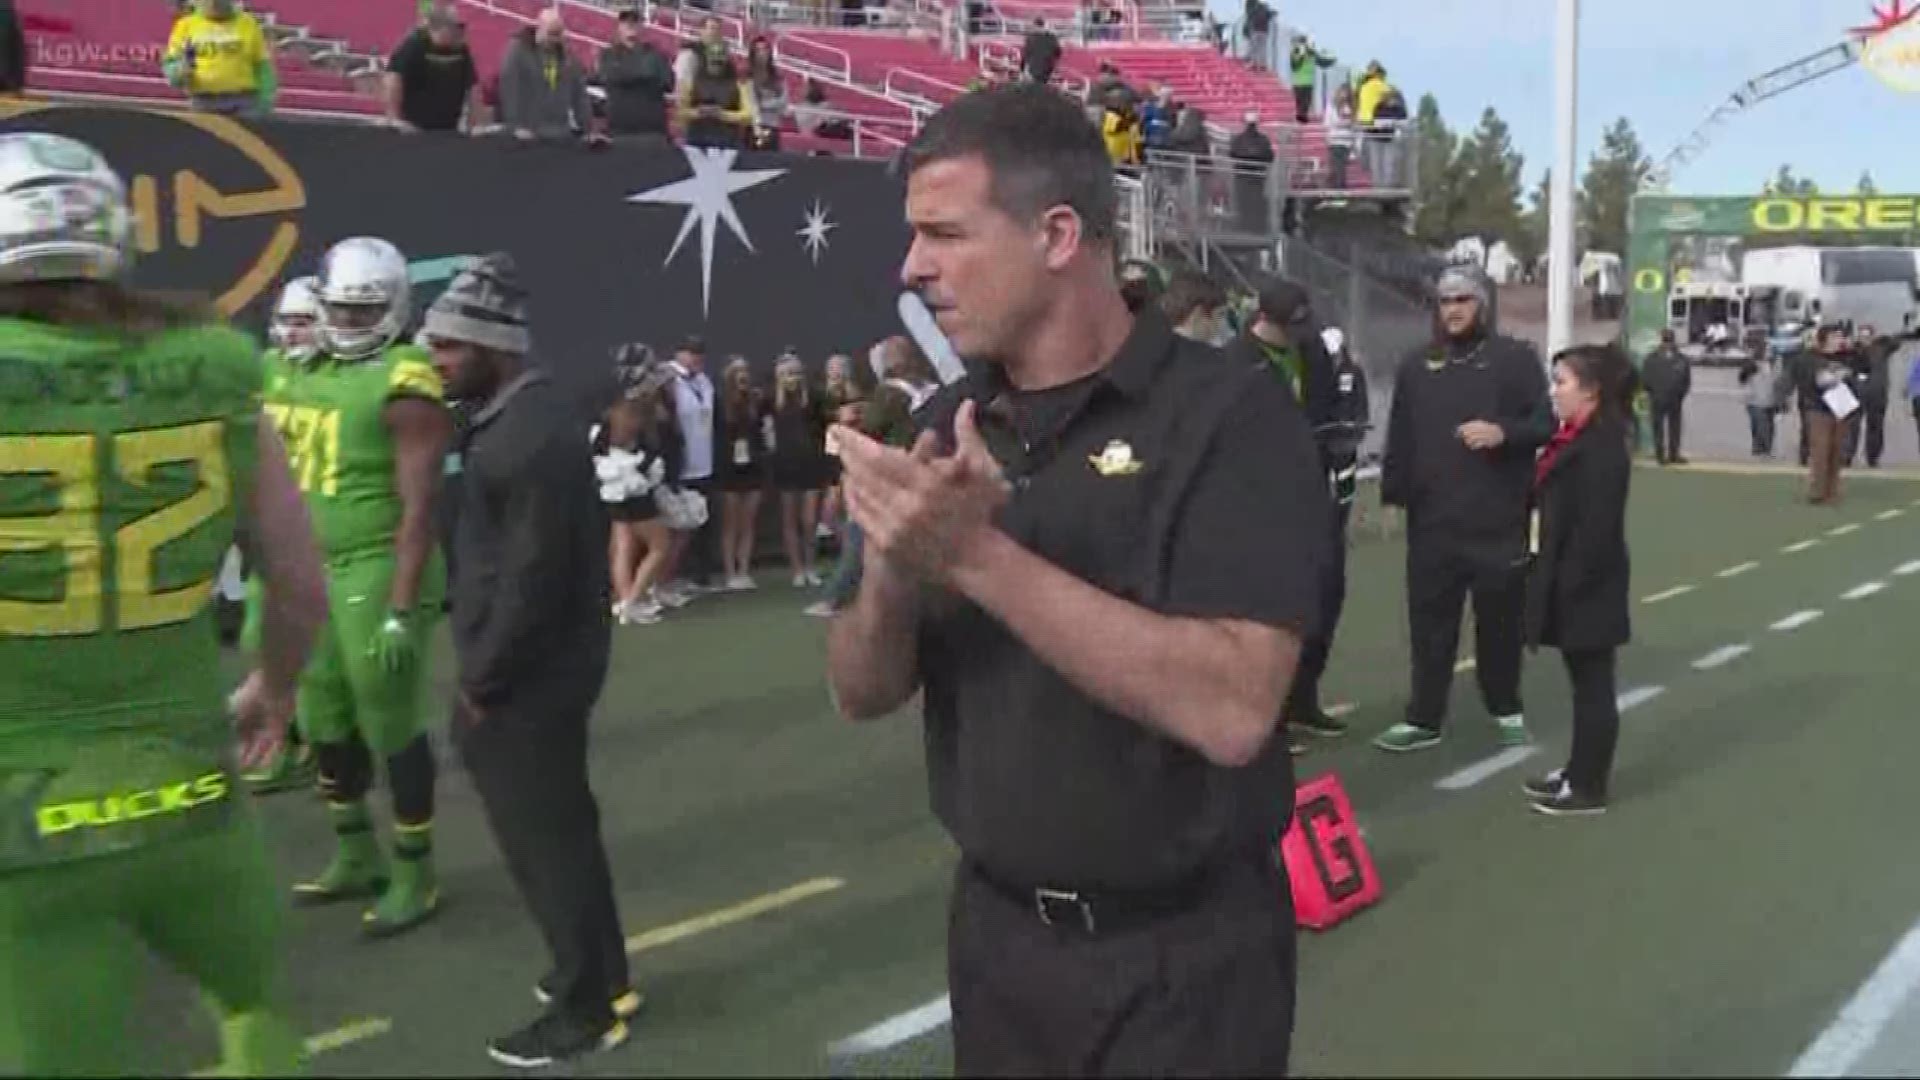 Oregon loses to Boise State 38-28 in the Las Vegas Bowl.